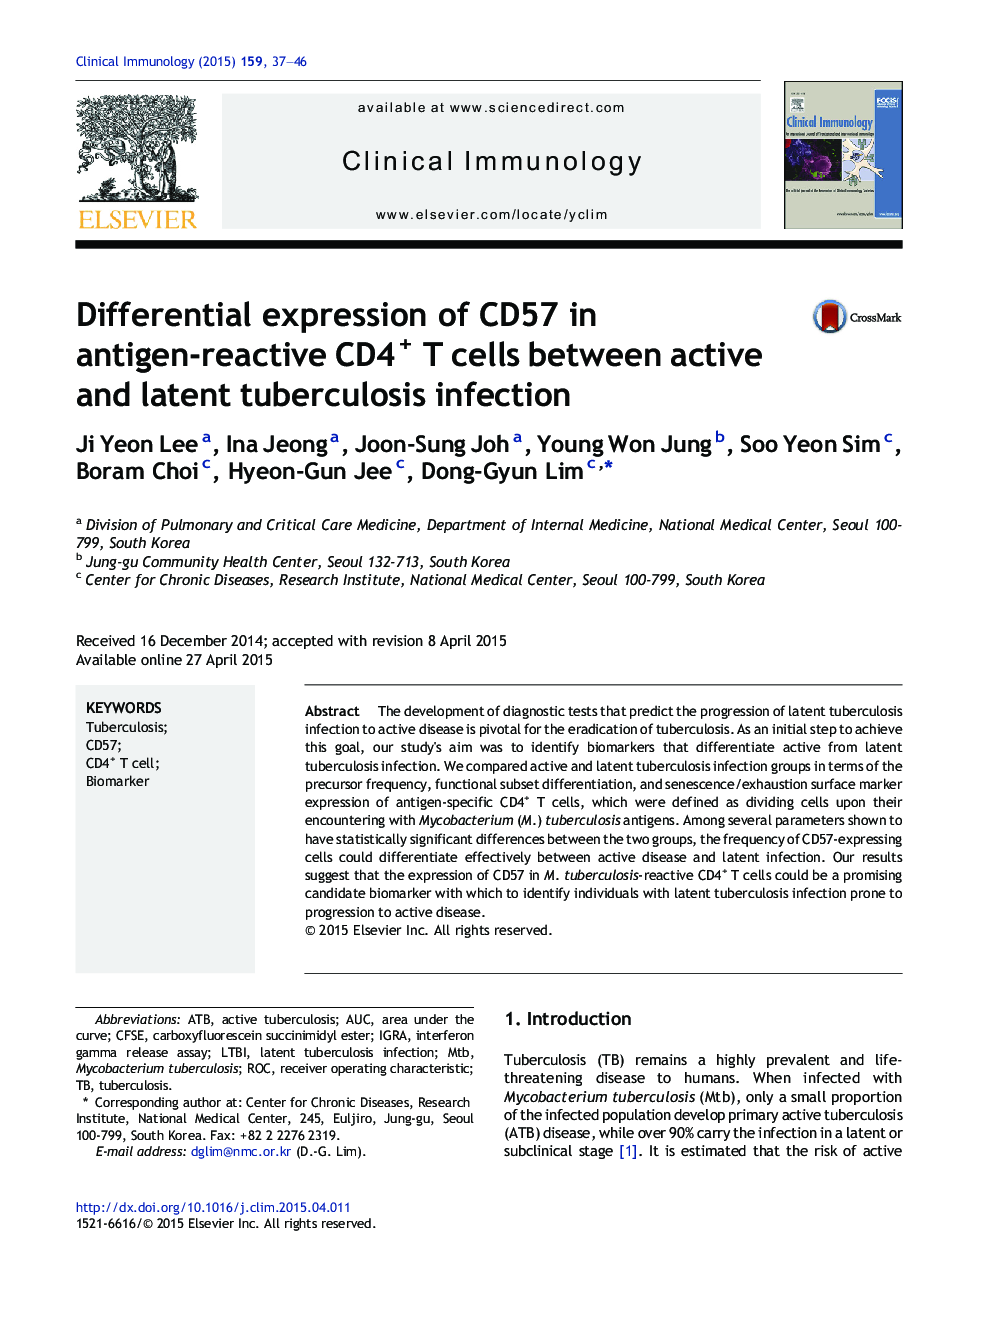 Differential expression of CD57 in antigen-reactive CD4+ T cells between active and latent tuberculosis infection